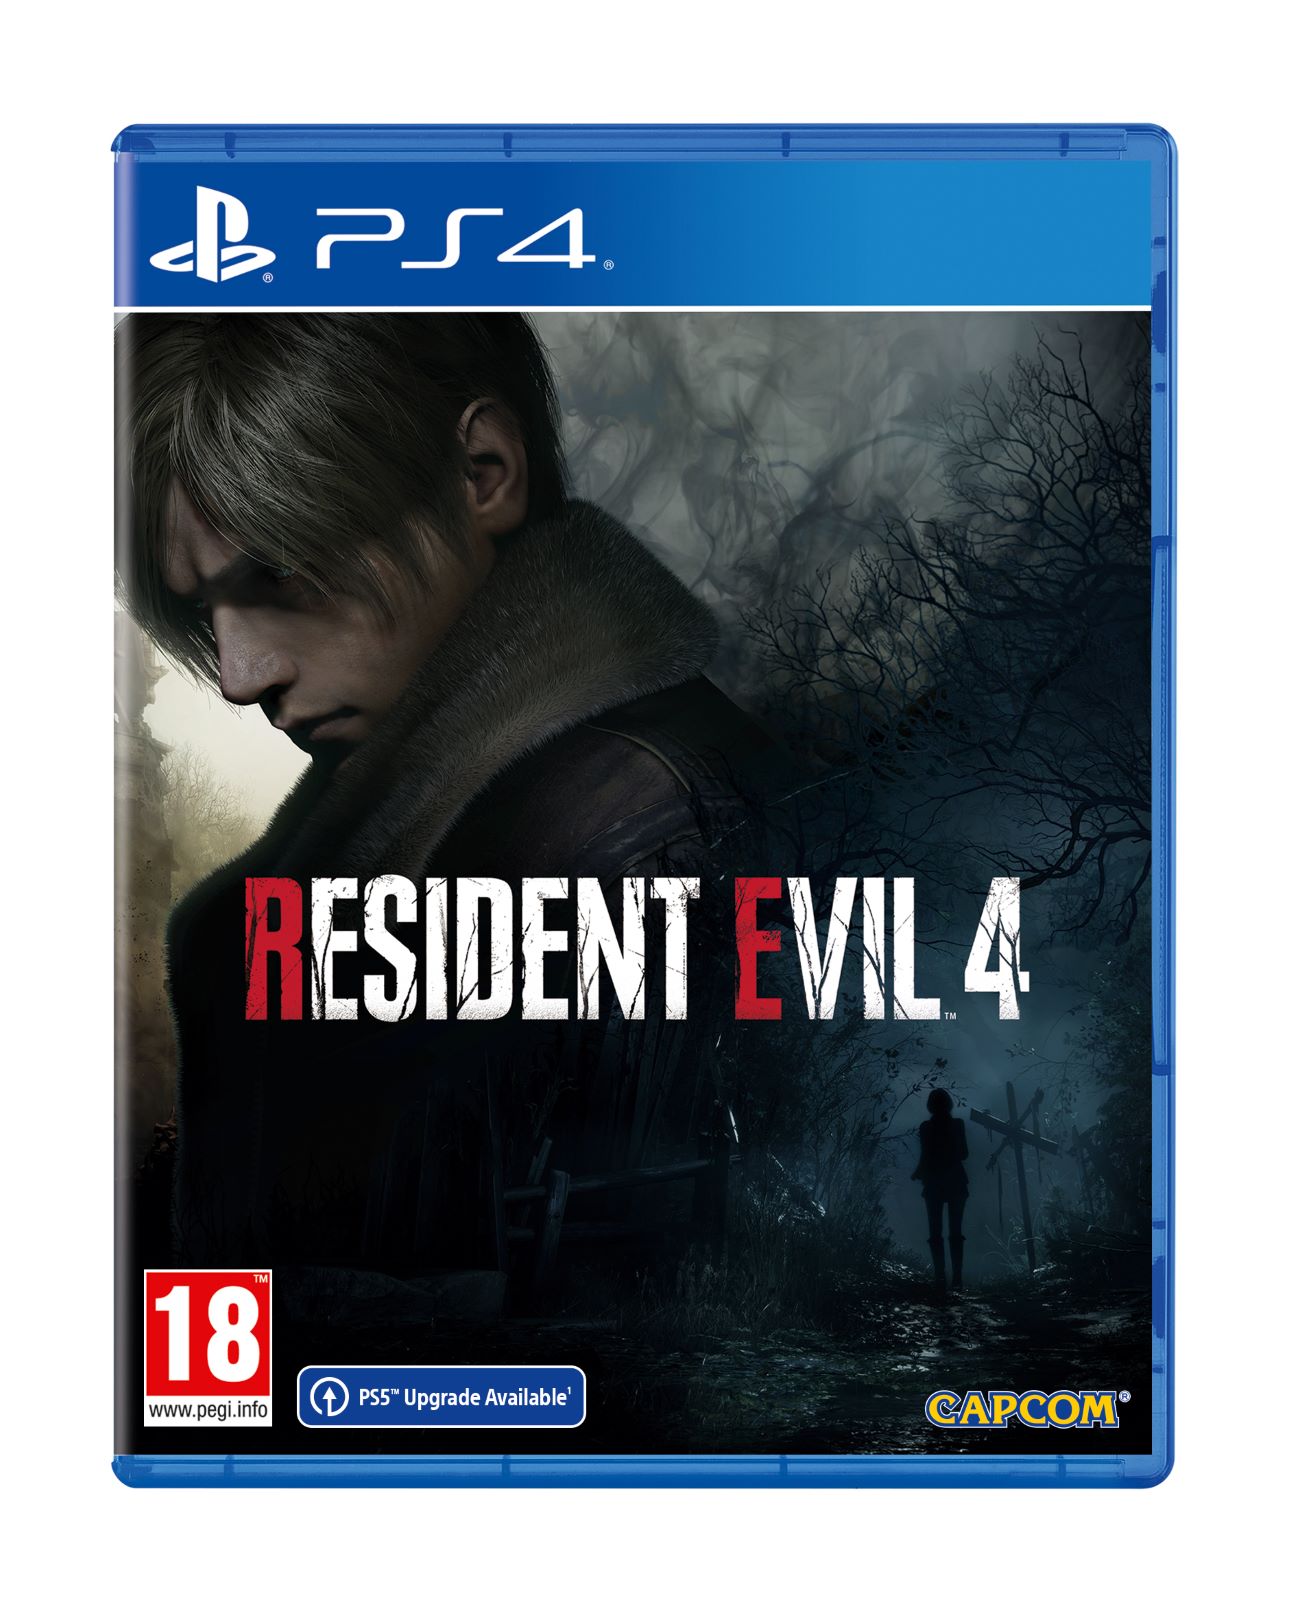 Resident Evil 4 Remake Steelbook Edition (PS4)